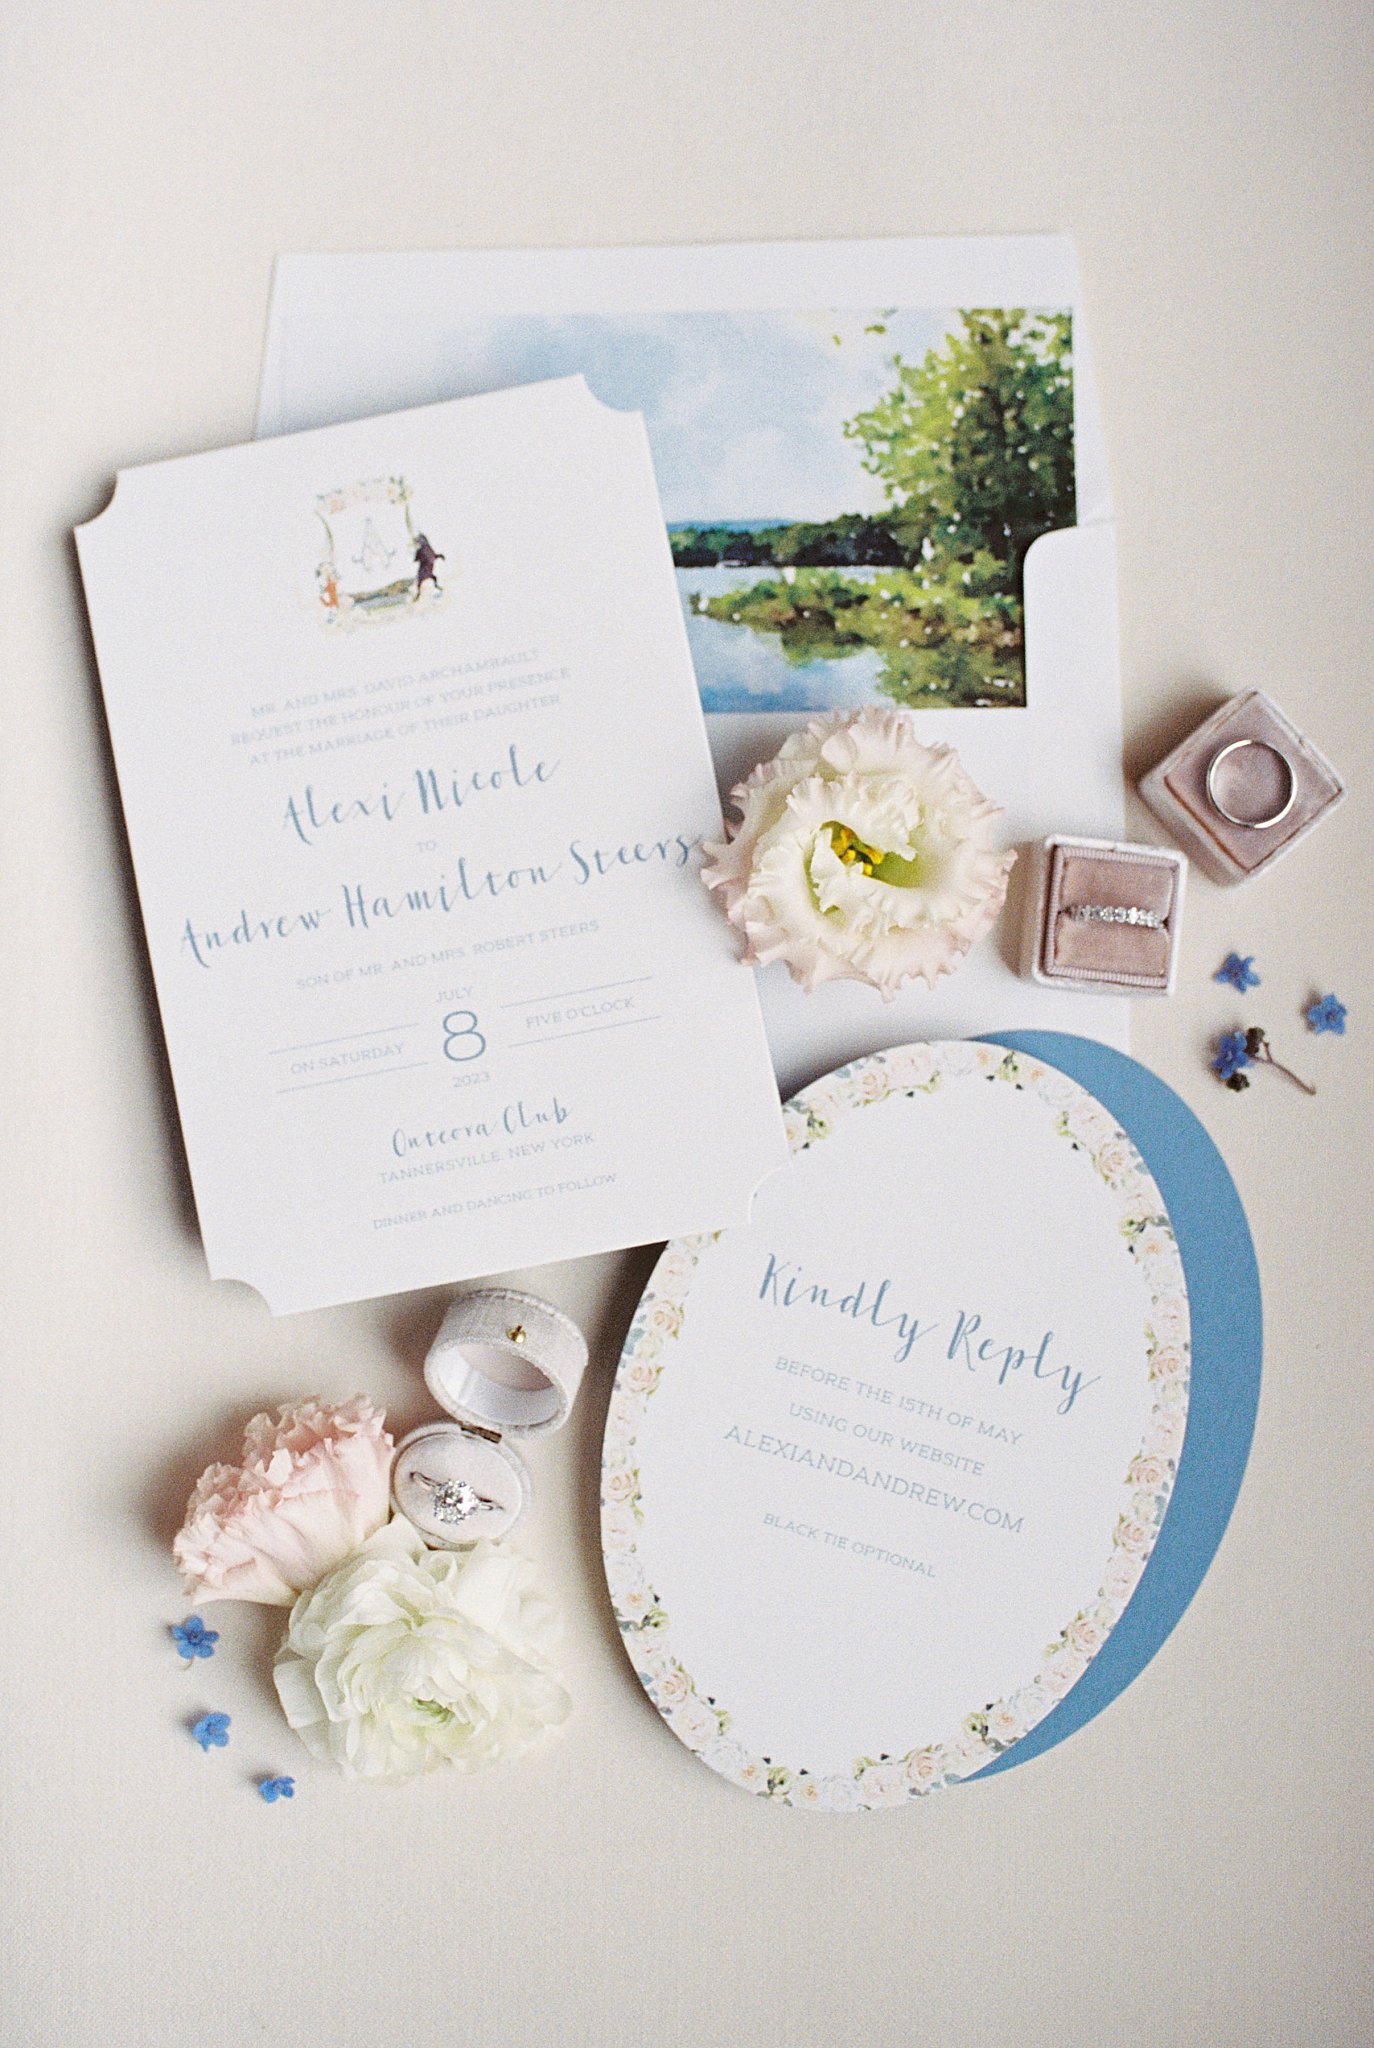 invitation suite lay out surrounded by flowers by Cape Cod wedding photographer